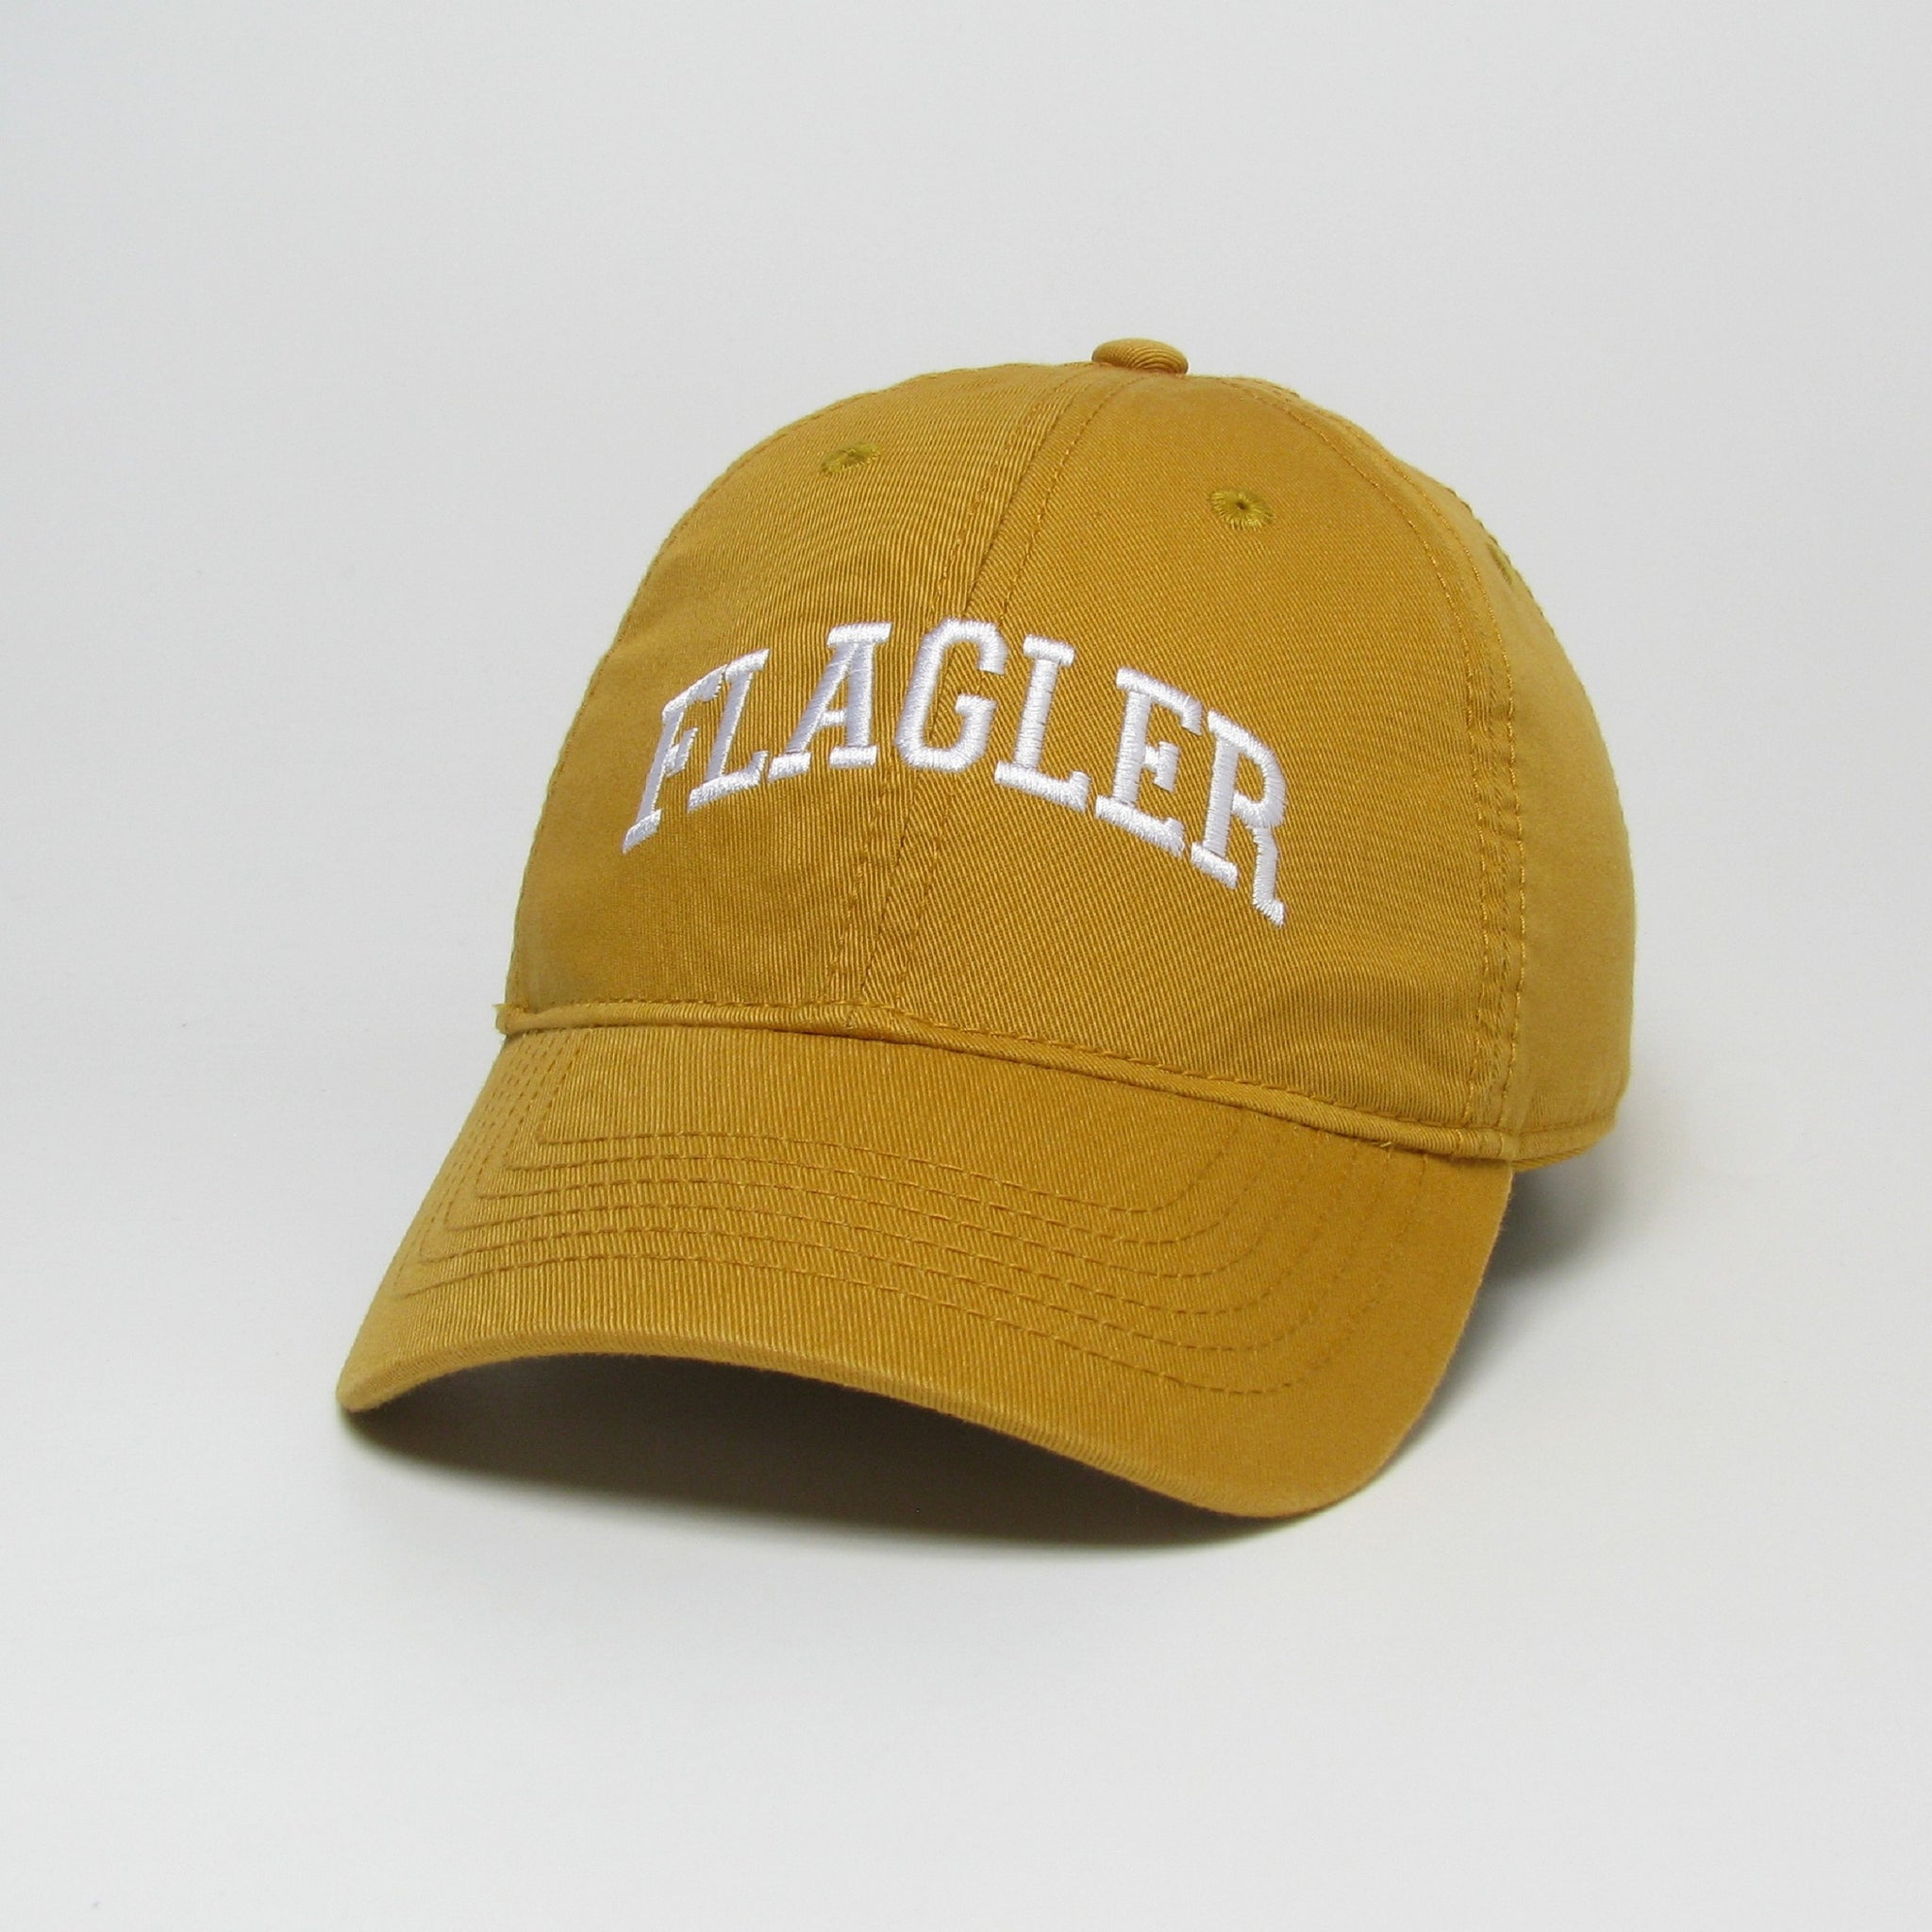 gold hat with white embroider saying Flagler